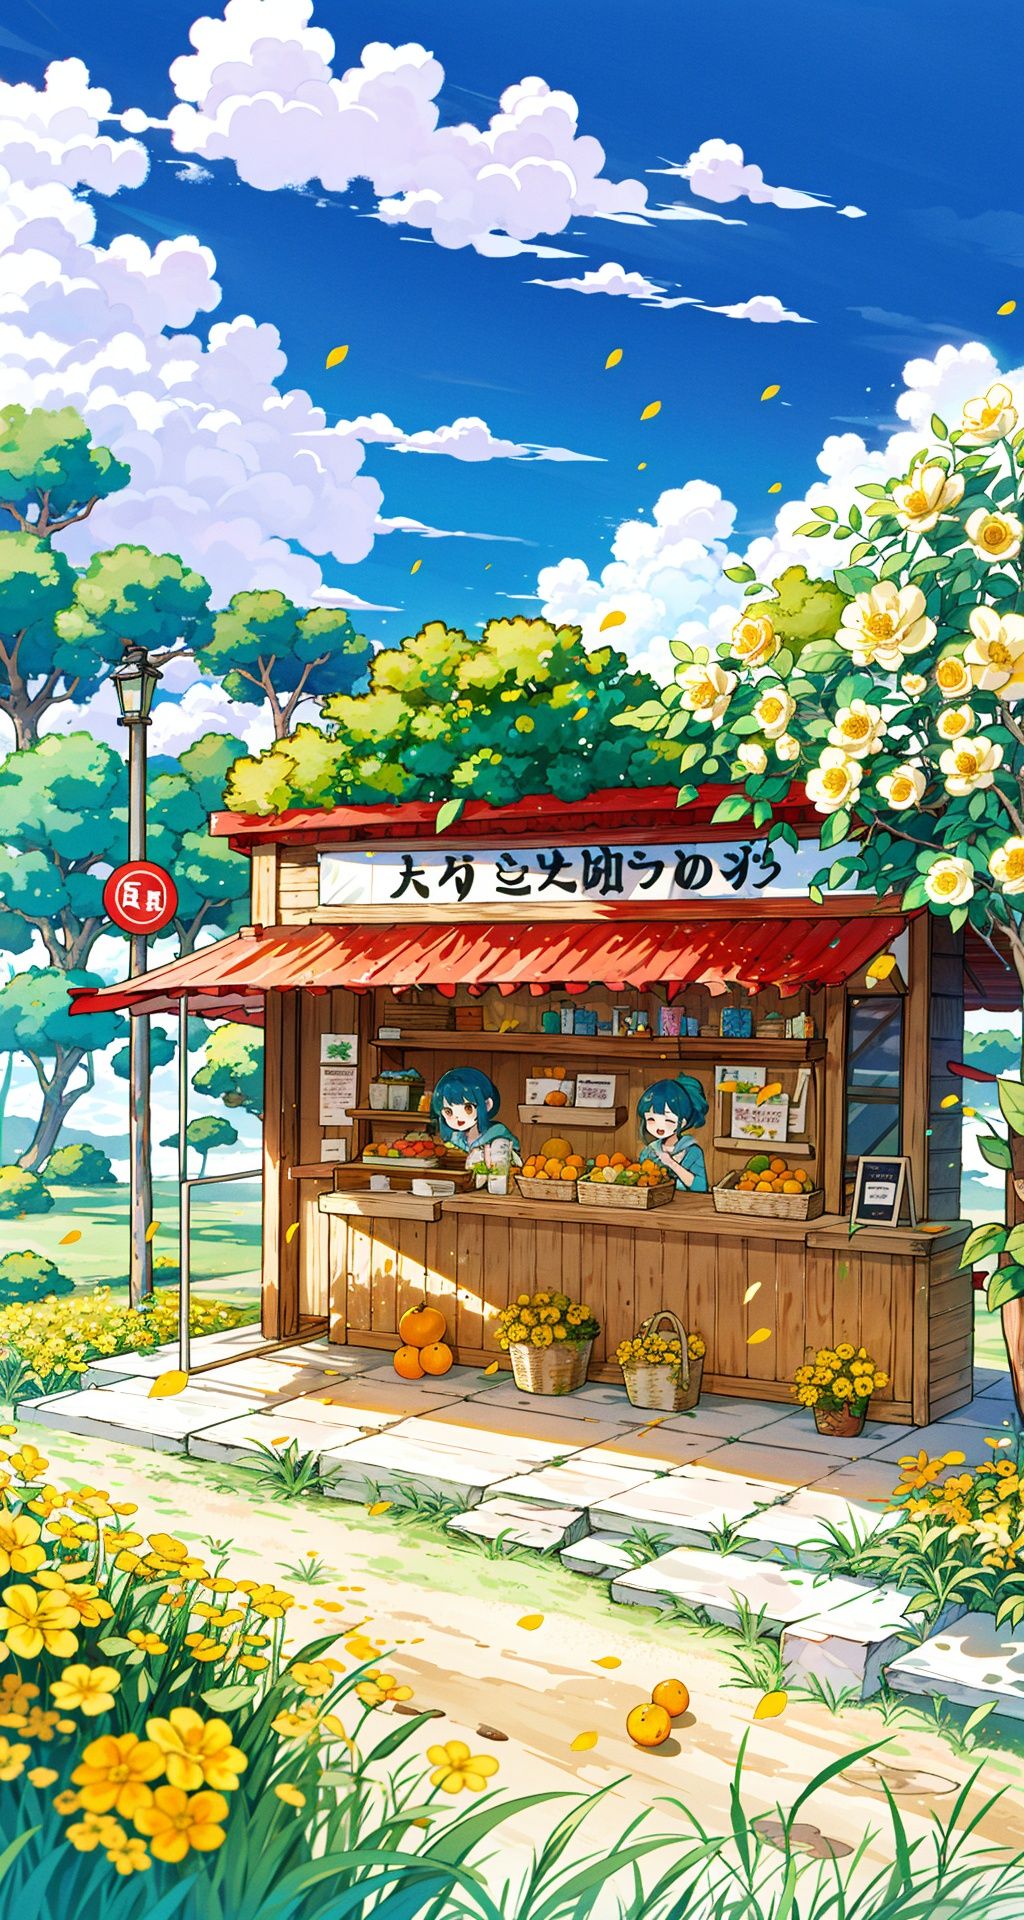 Shampoo, with a shop, grocery store, illustrations, trees, grass, yellow flowers, oranges, moss, stools, clouds, fallen leaves, sunshades, delicious food, steamed buns, detailed character designs, road signs, and vertical paintings